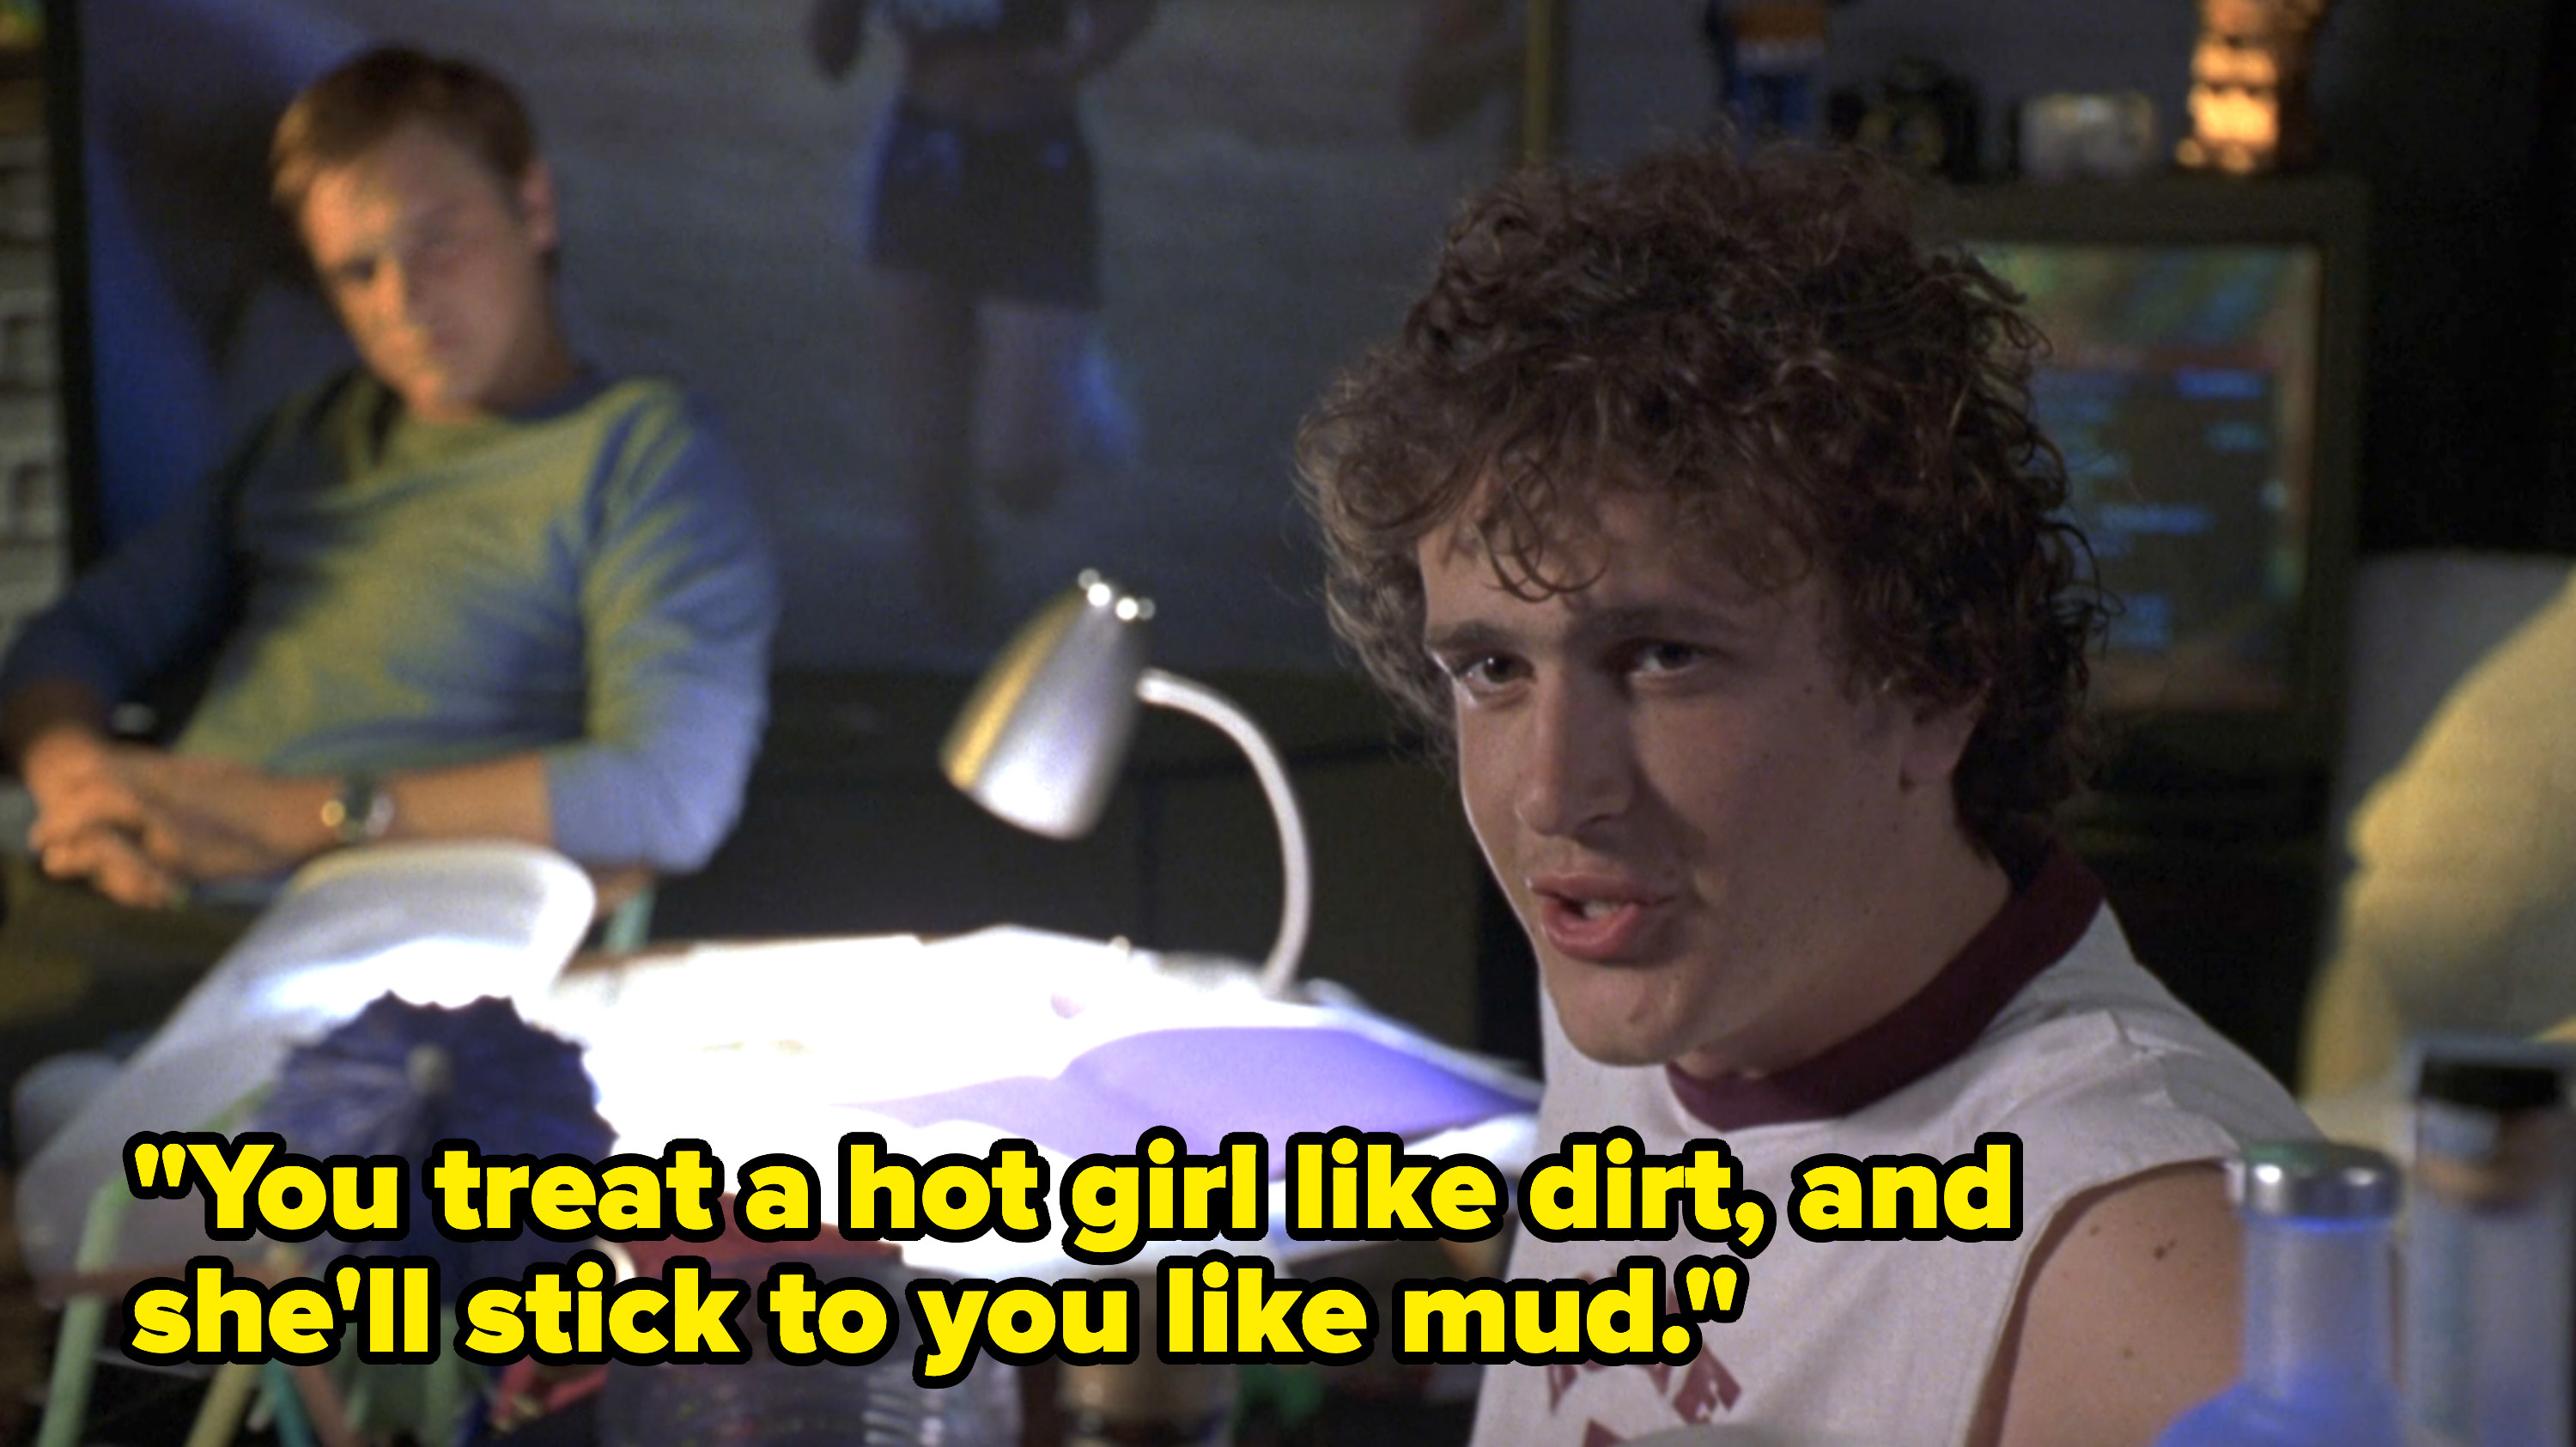 Jason Segel&#x27;s character saying, &quot;You treat a hot girl like dirt, and she&#x27;ll stick to you like mud&quot;